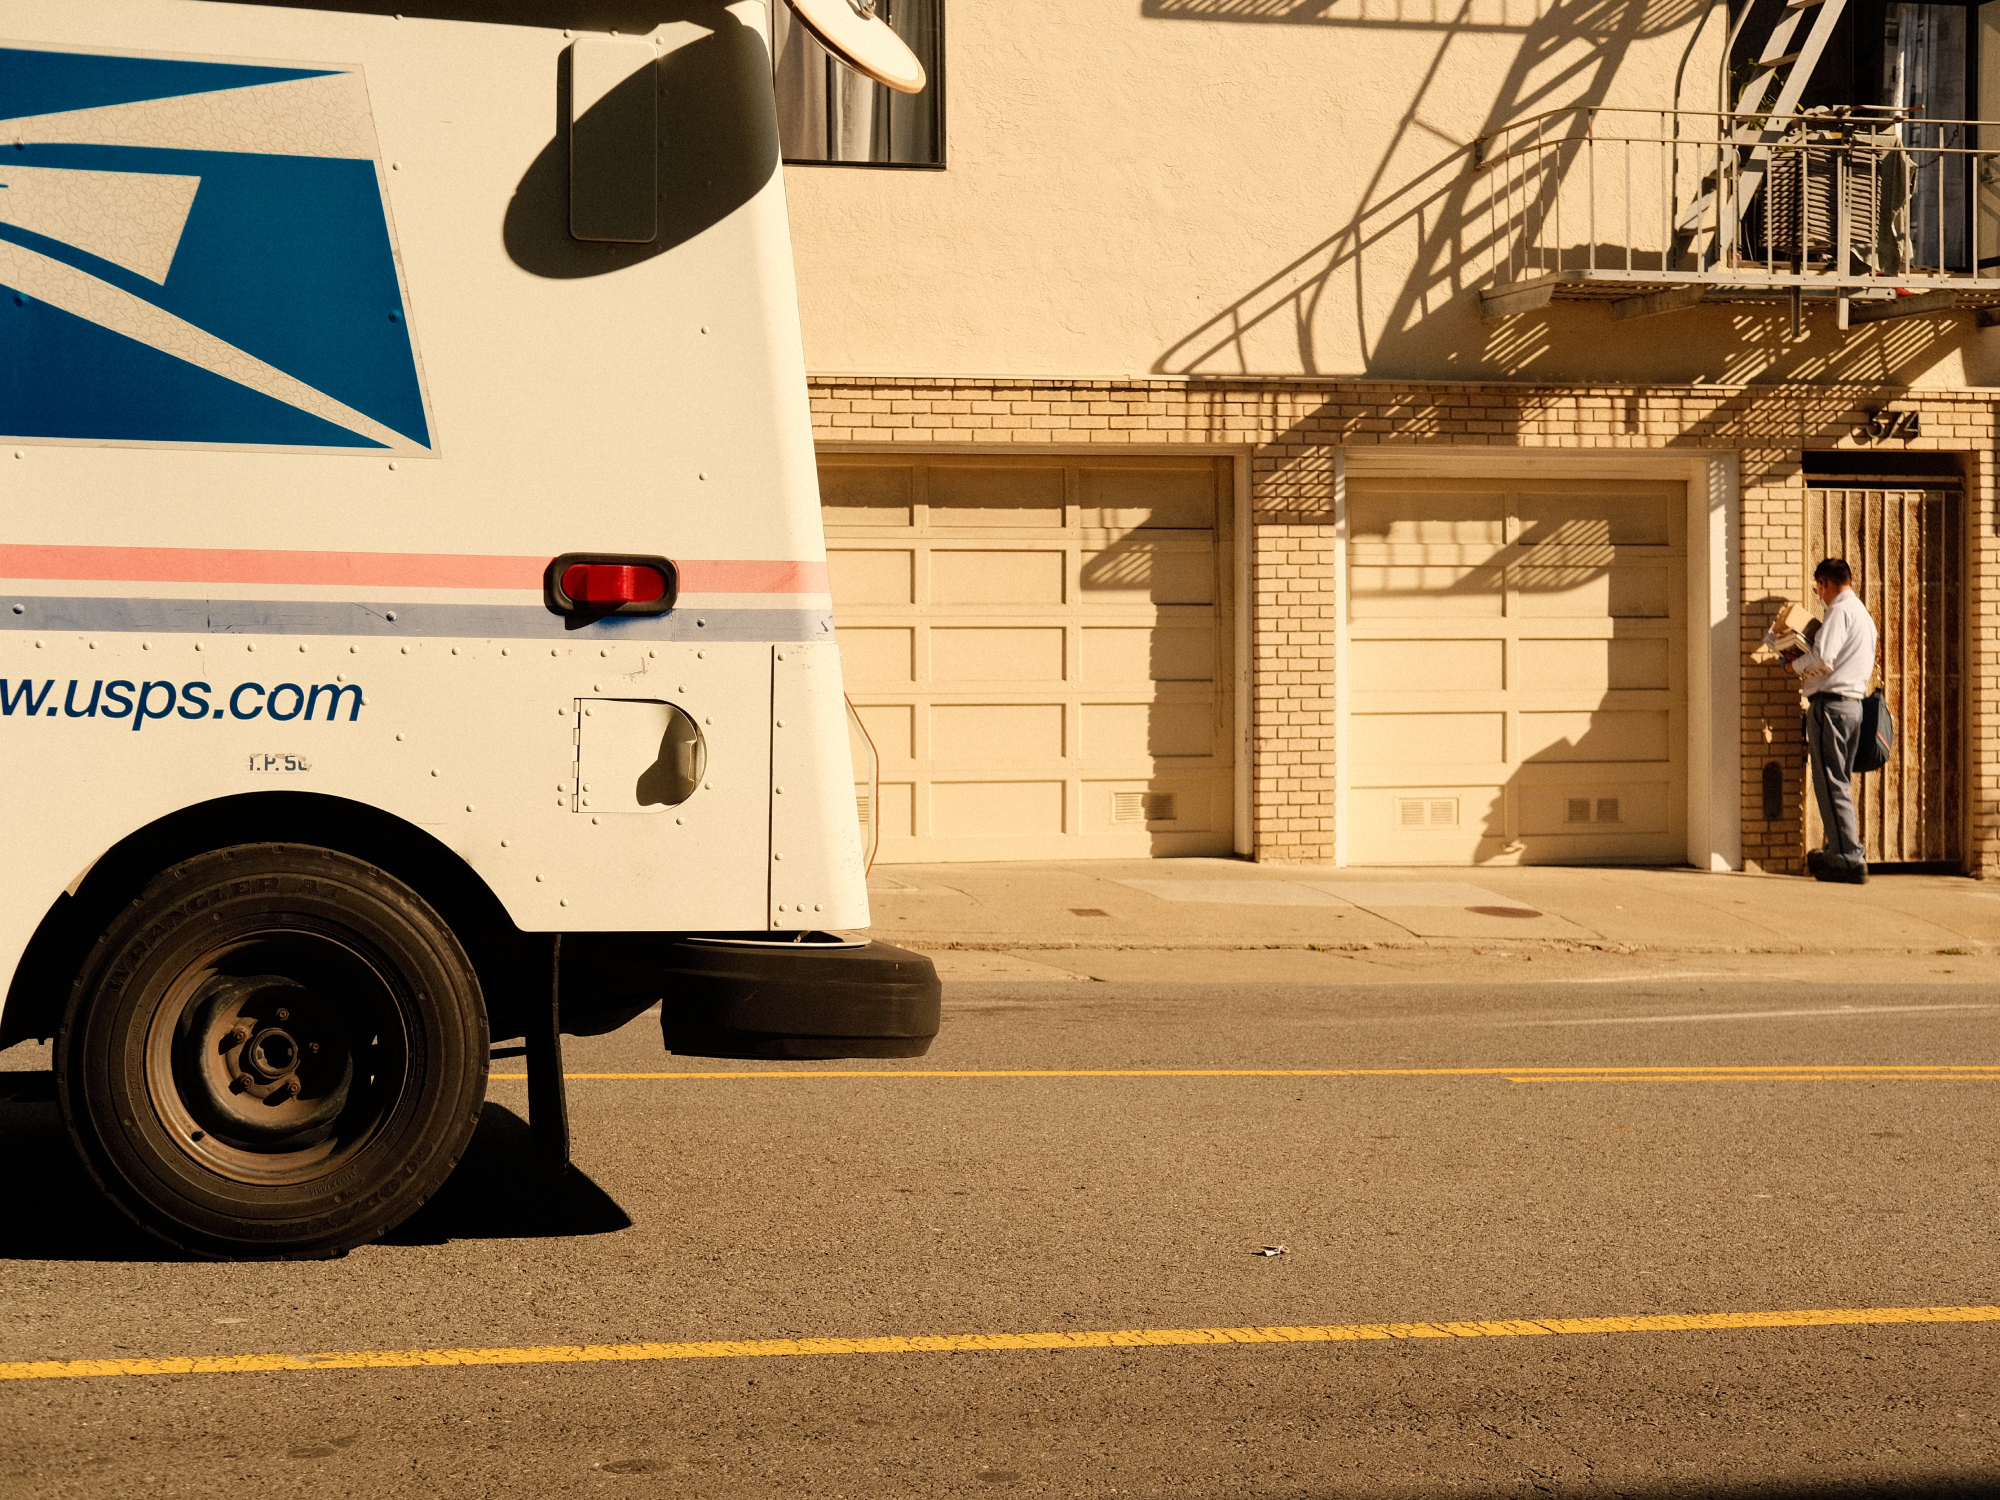 A US postal worker delivering packages to a tan residential building, with a USPS truck parked on the street in the foreground.